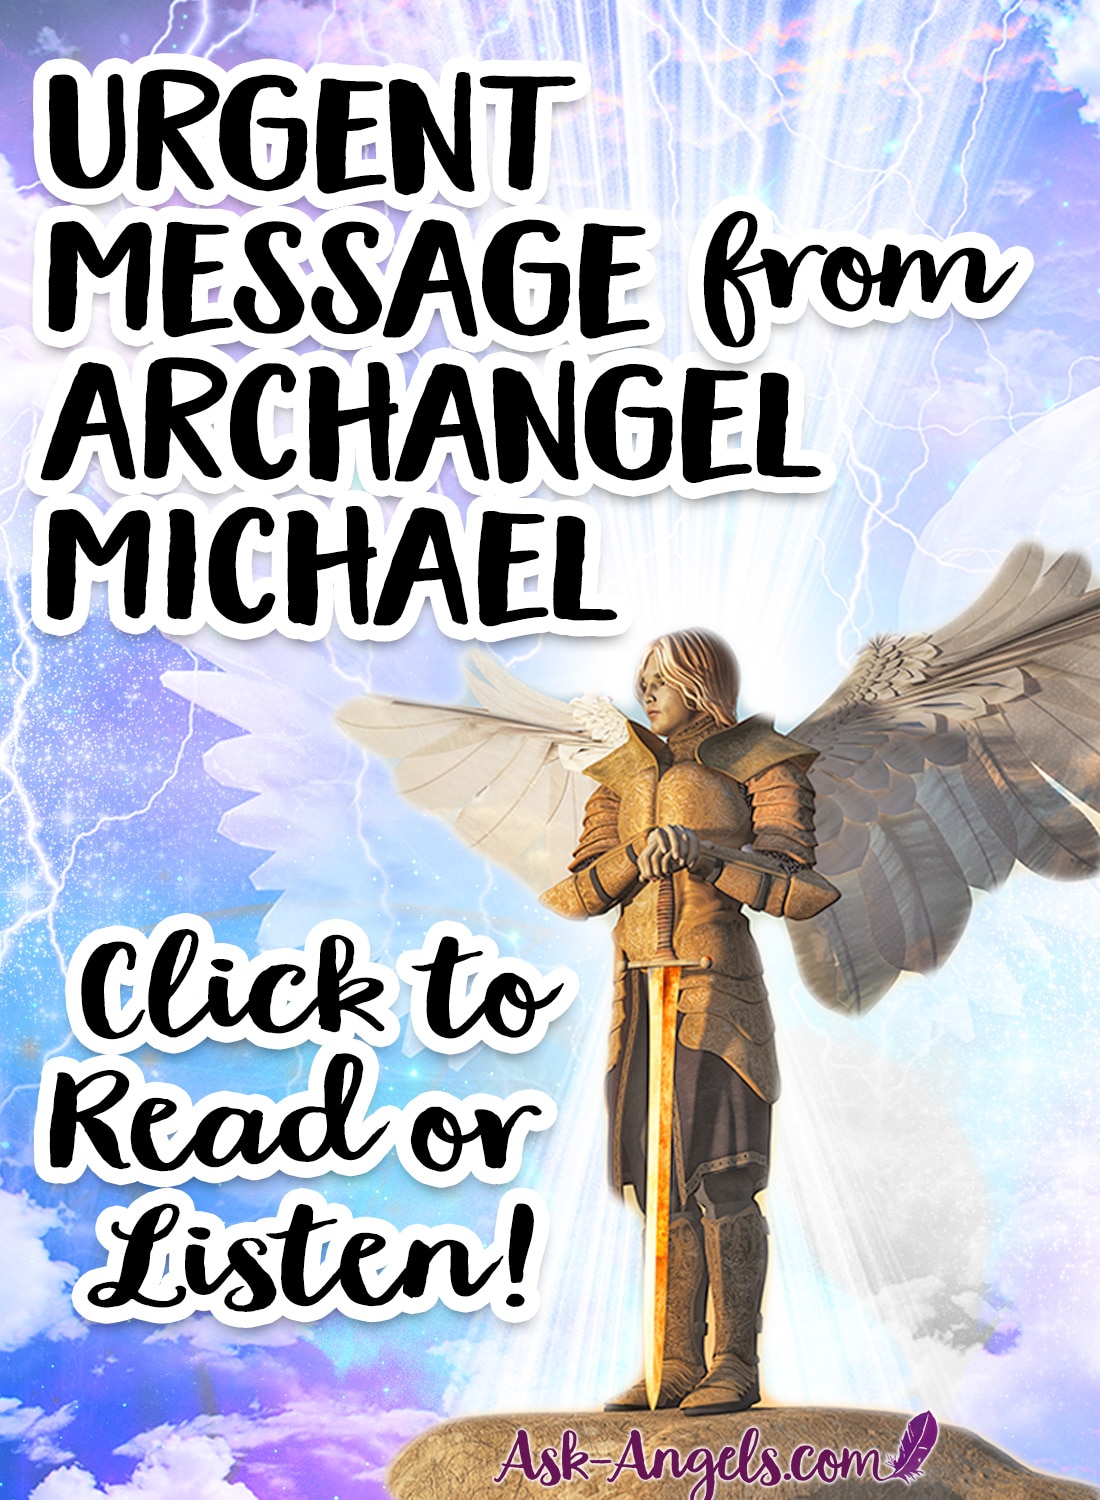 Channeled Message from Archangel Michael